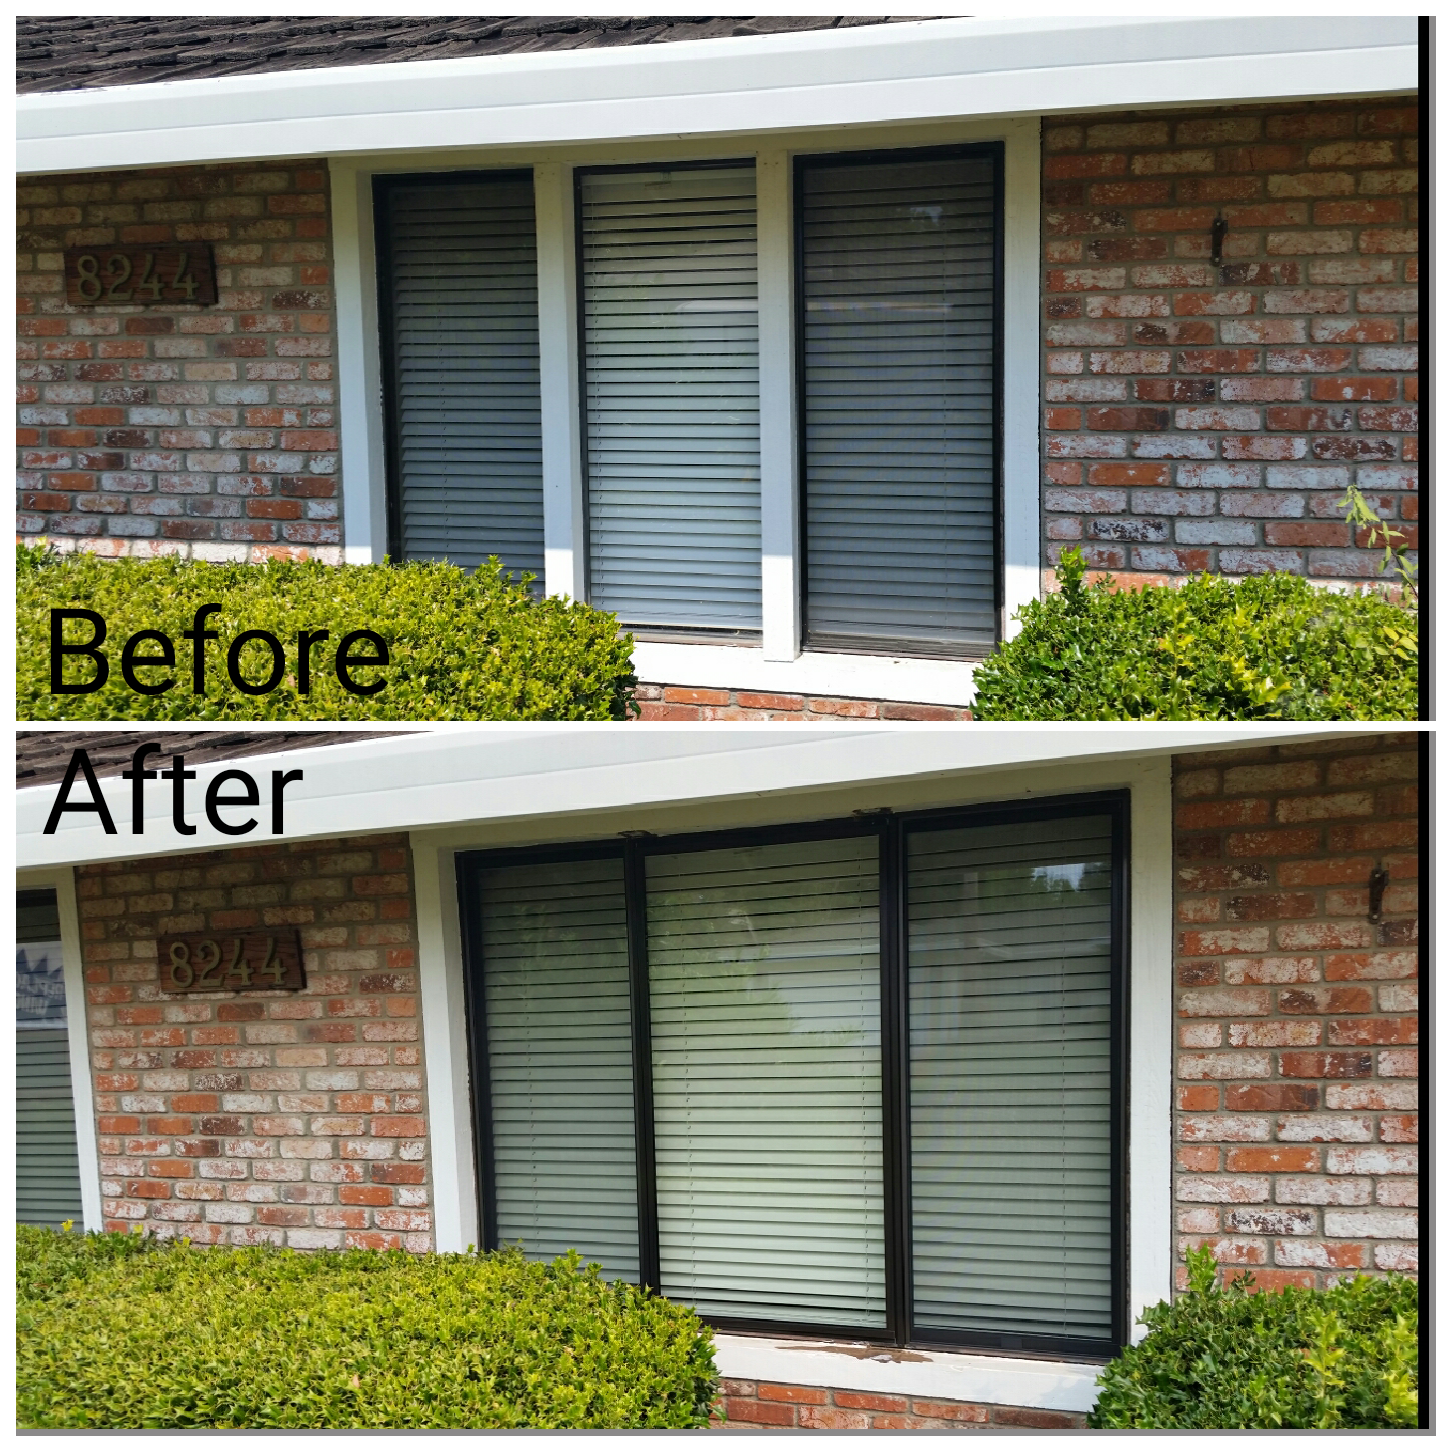 windows before and after 8244